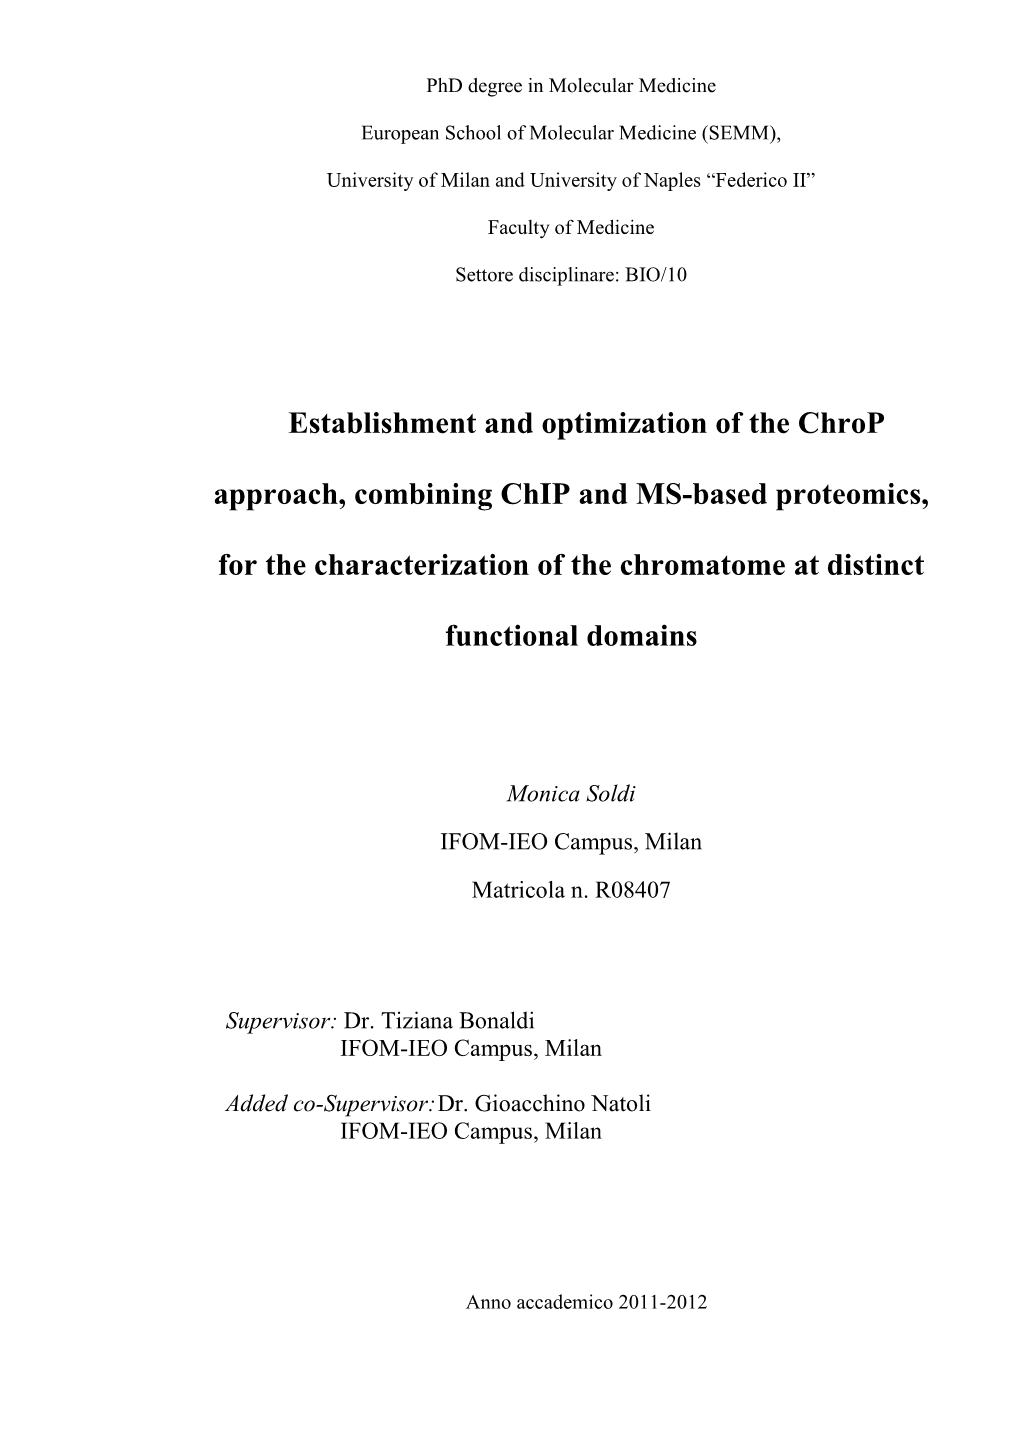 Establishment and Optimization of the Chrop Approach, Combining Chip and MS-Based Proteomics